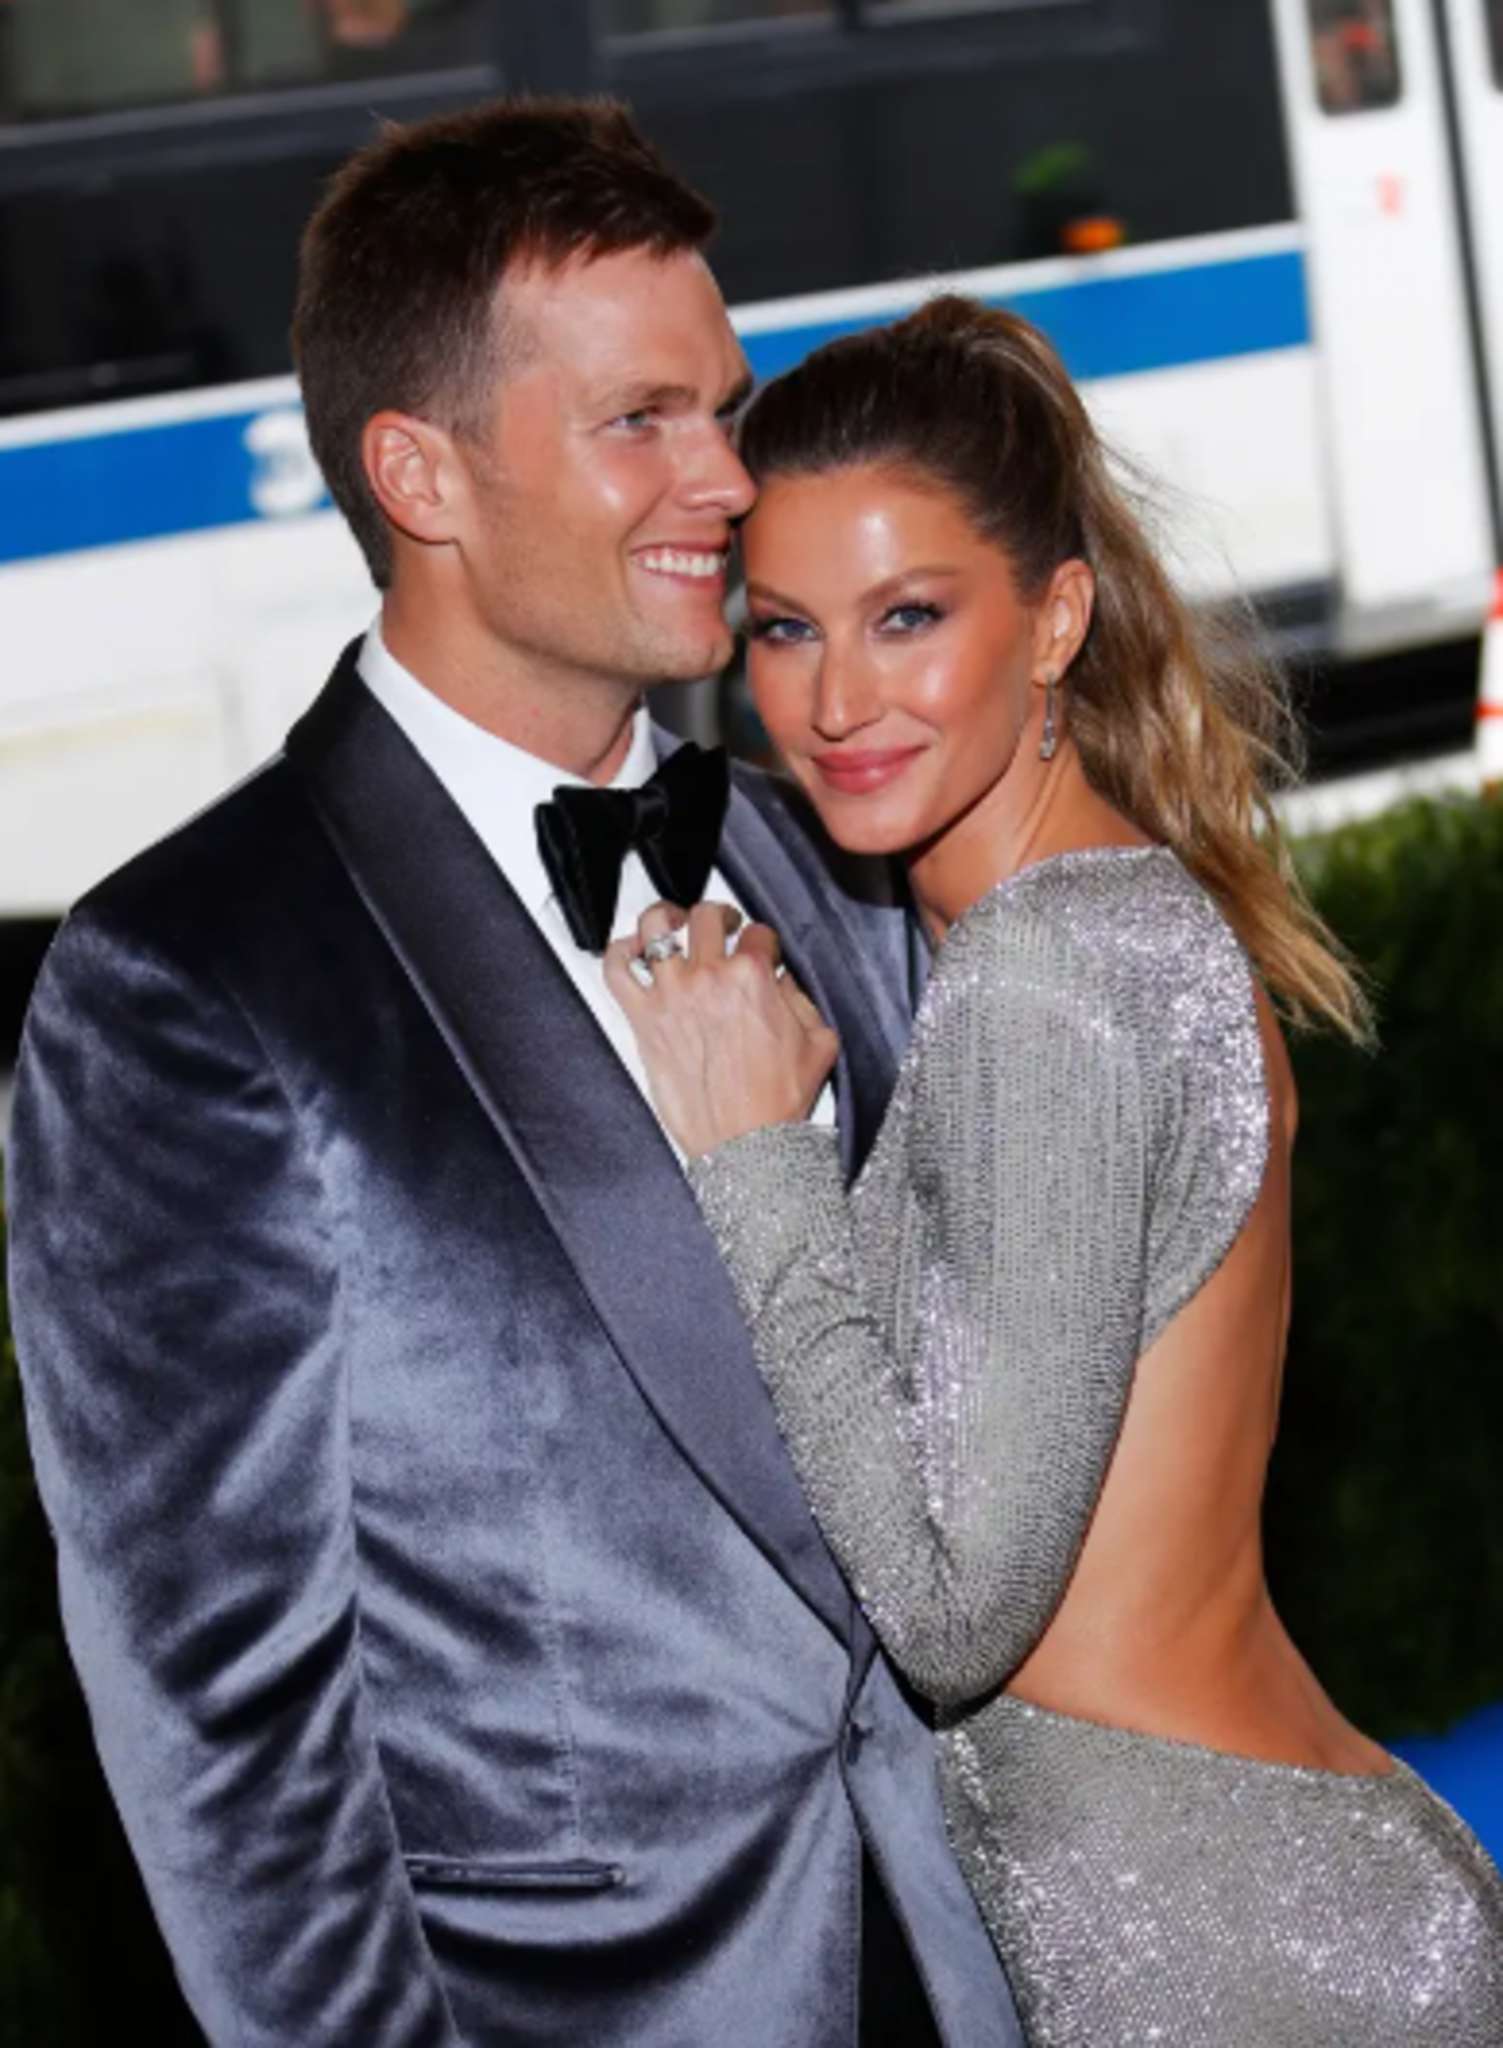 When He Returned To Training Camp After An 11-Day Break, Tom Brady Made A Marriage-Related Allusion